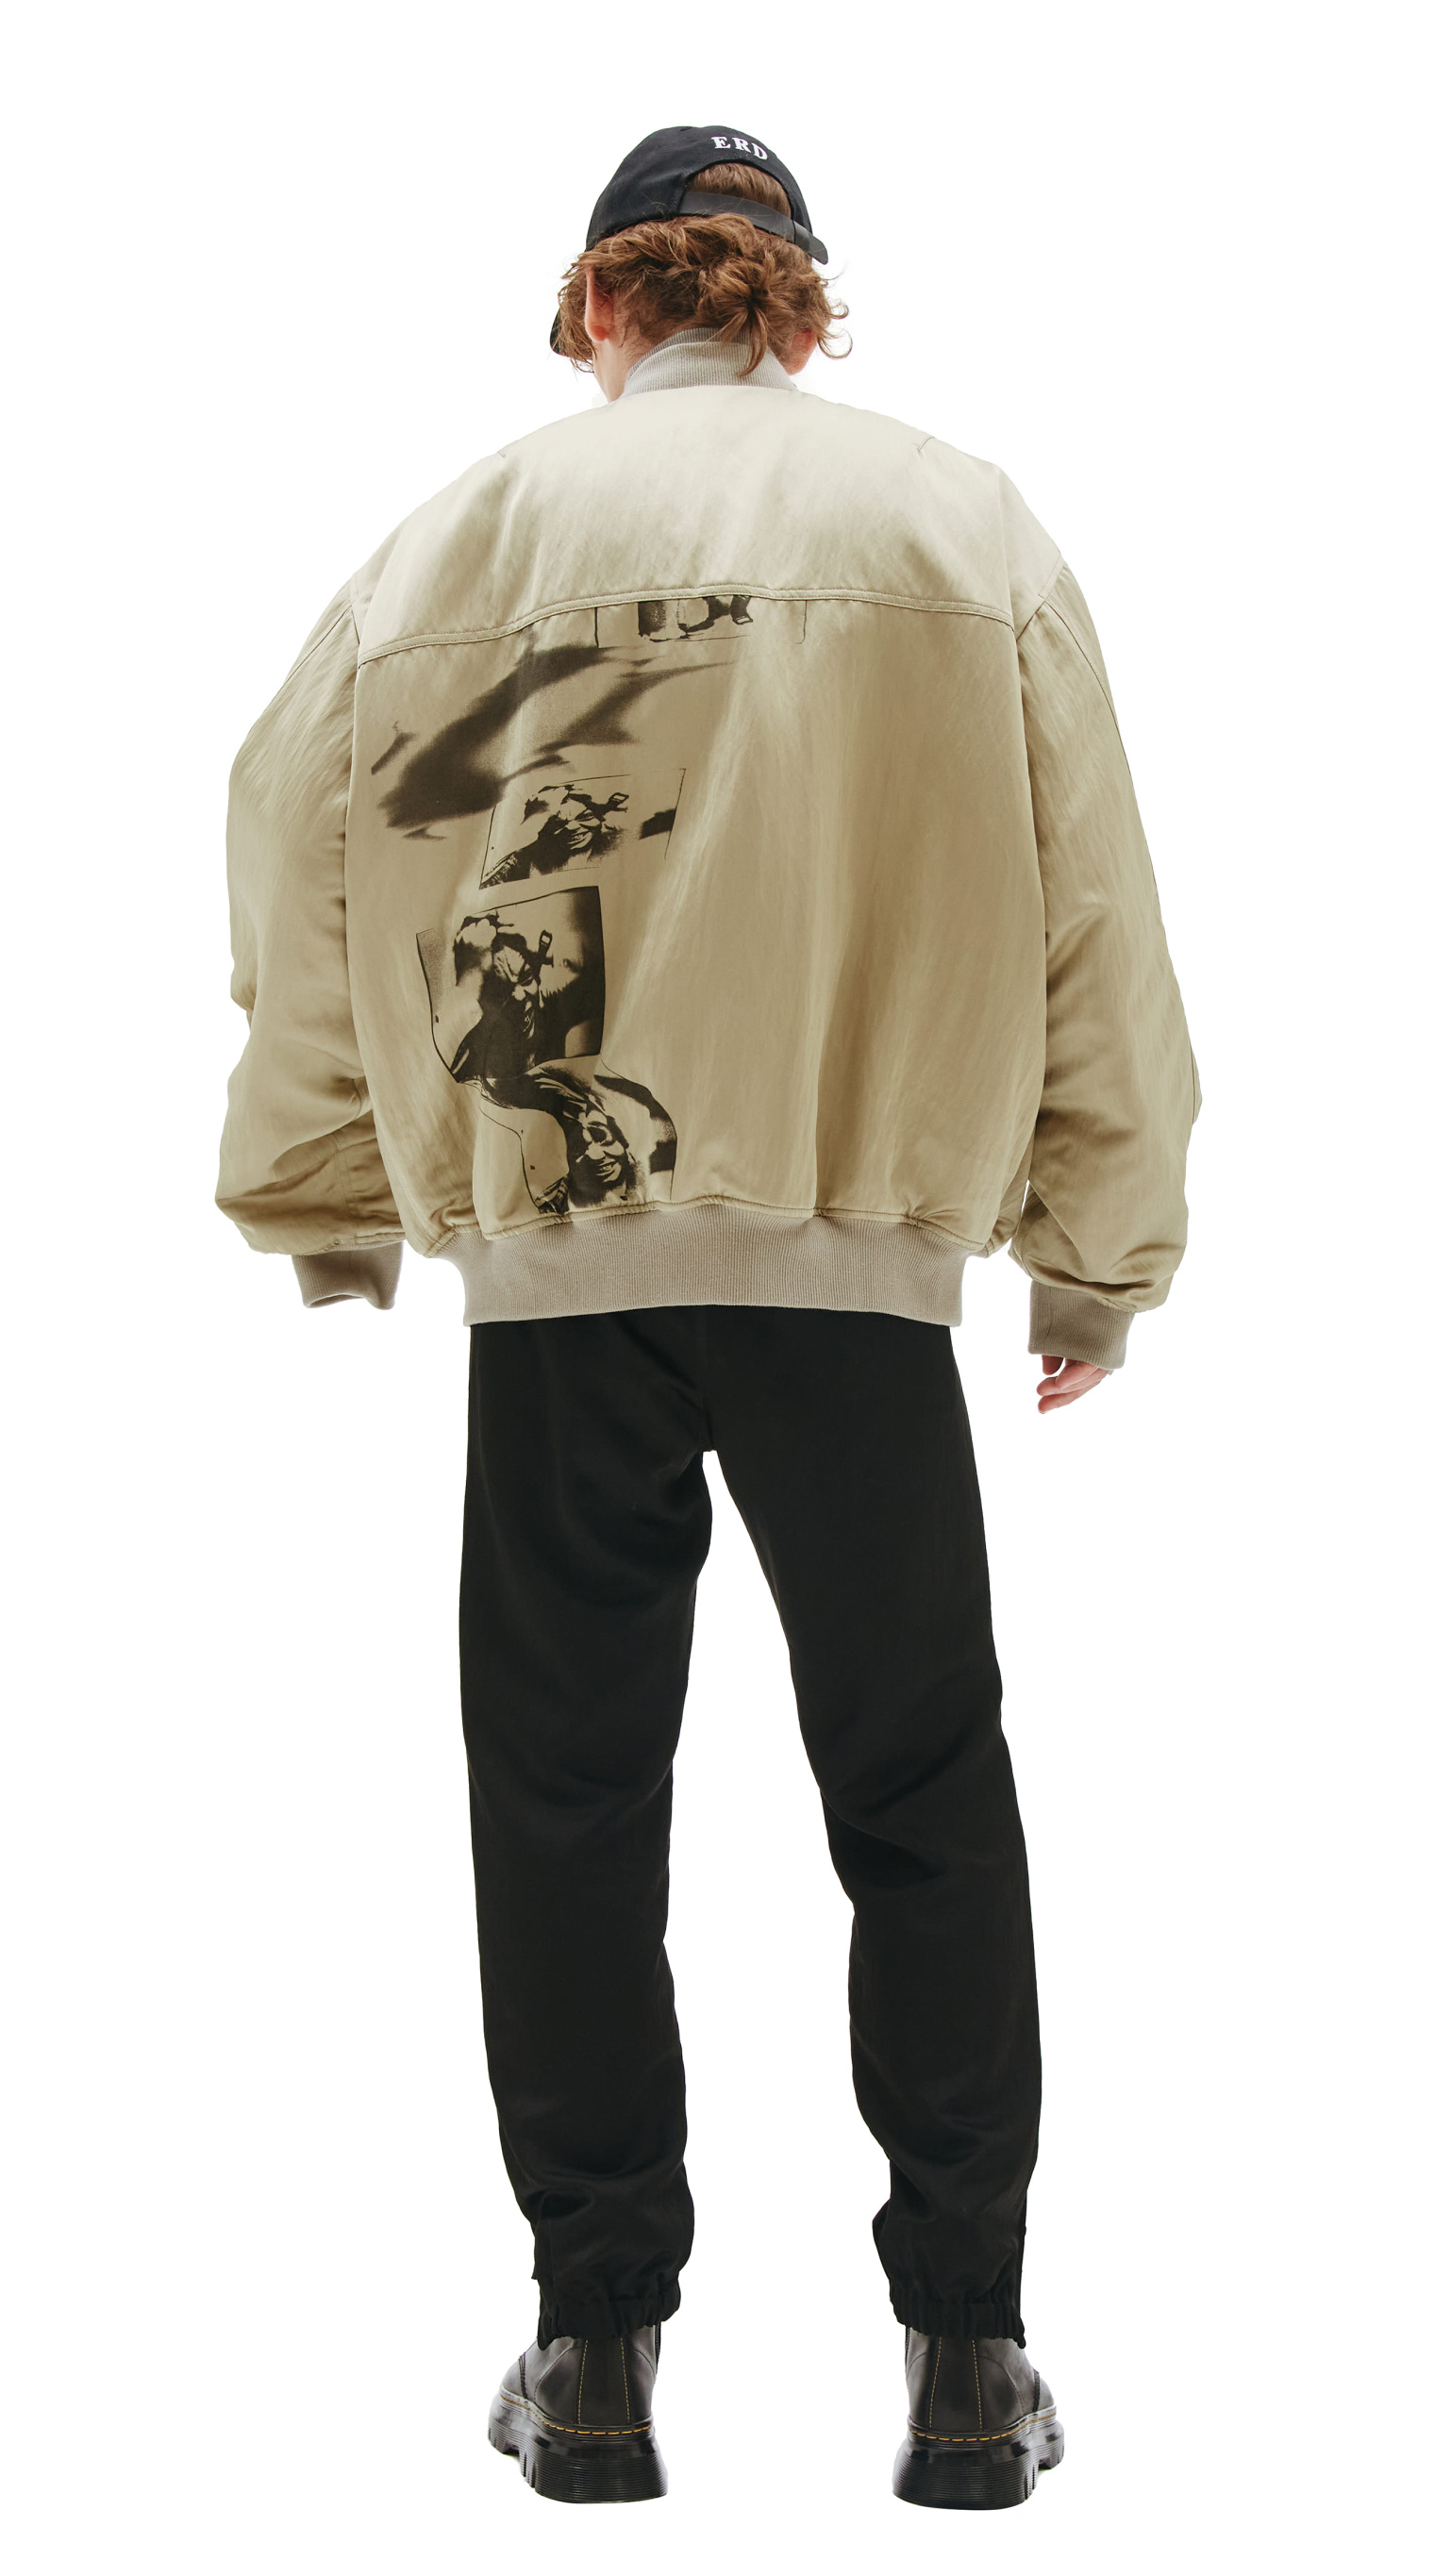 Enfants Riches Deprimes Anxiety Oversized Bomber